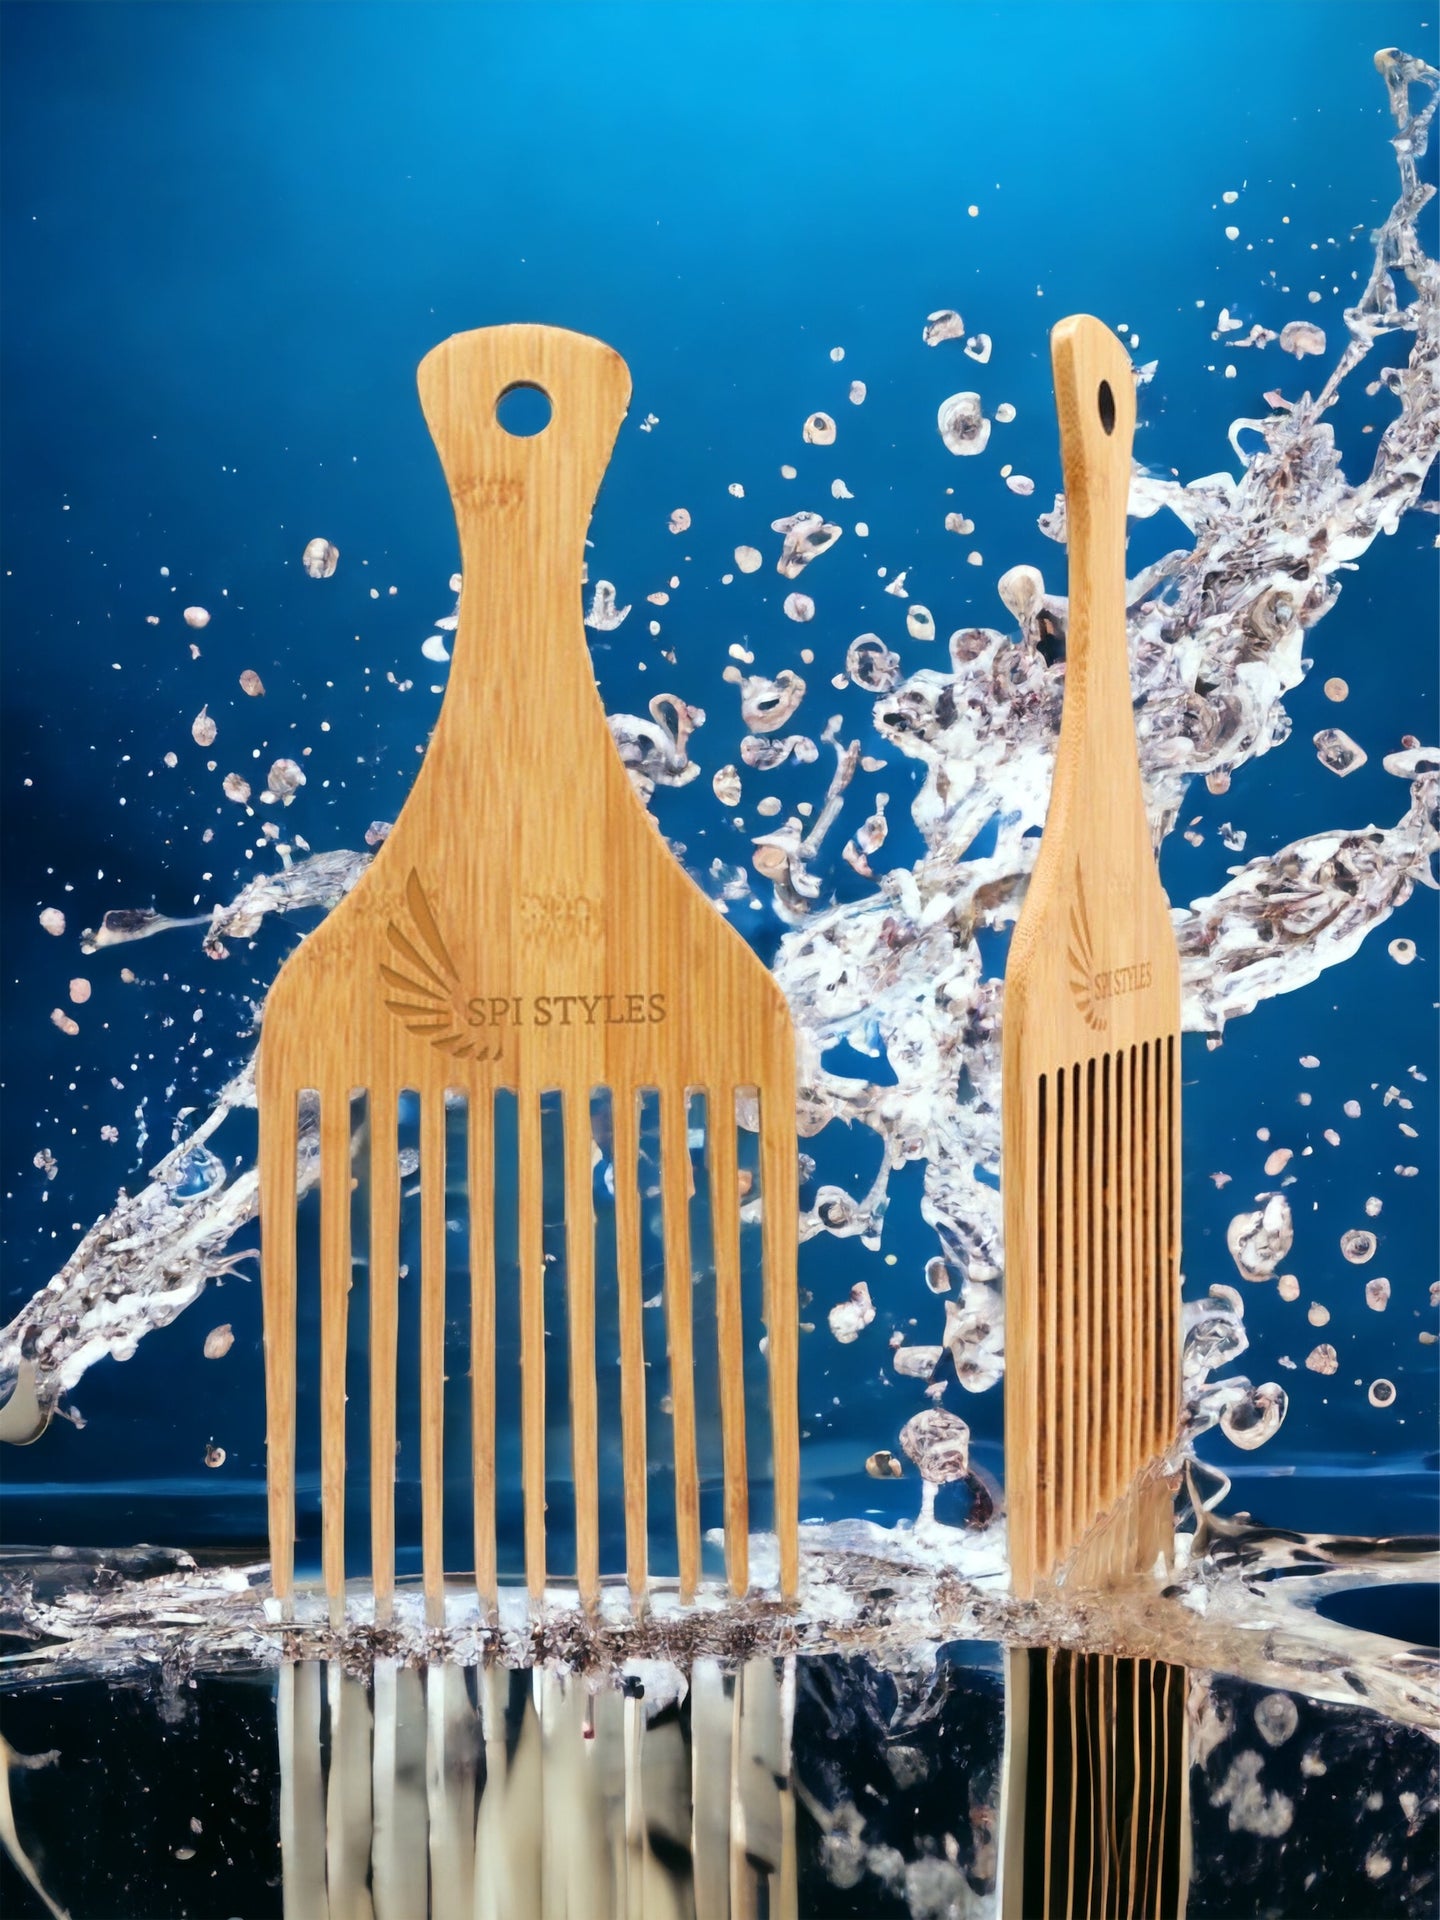 NEW  SPI Styles Natural Wood Jumbo (Extreme Size)  - Afro Hair and Beard Pick -  Wide Tooth Pick, Scalp Massage Detangling Comb